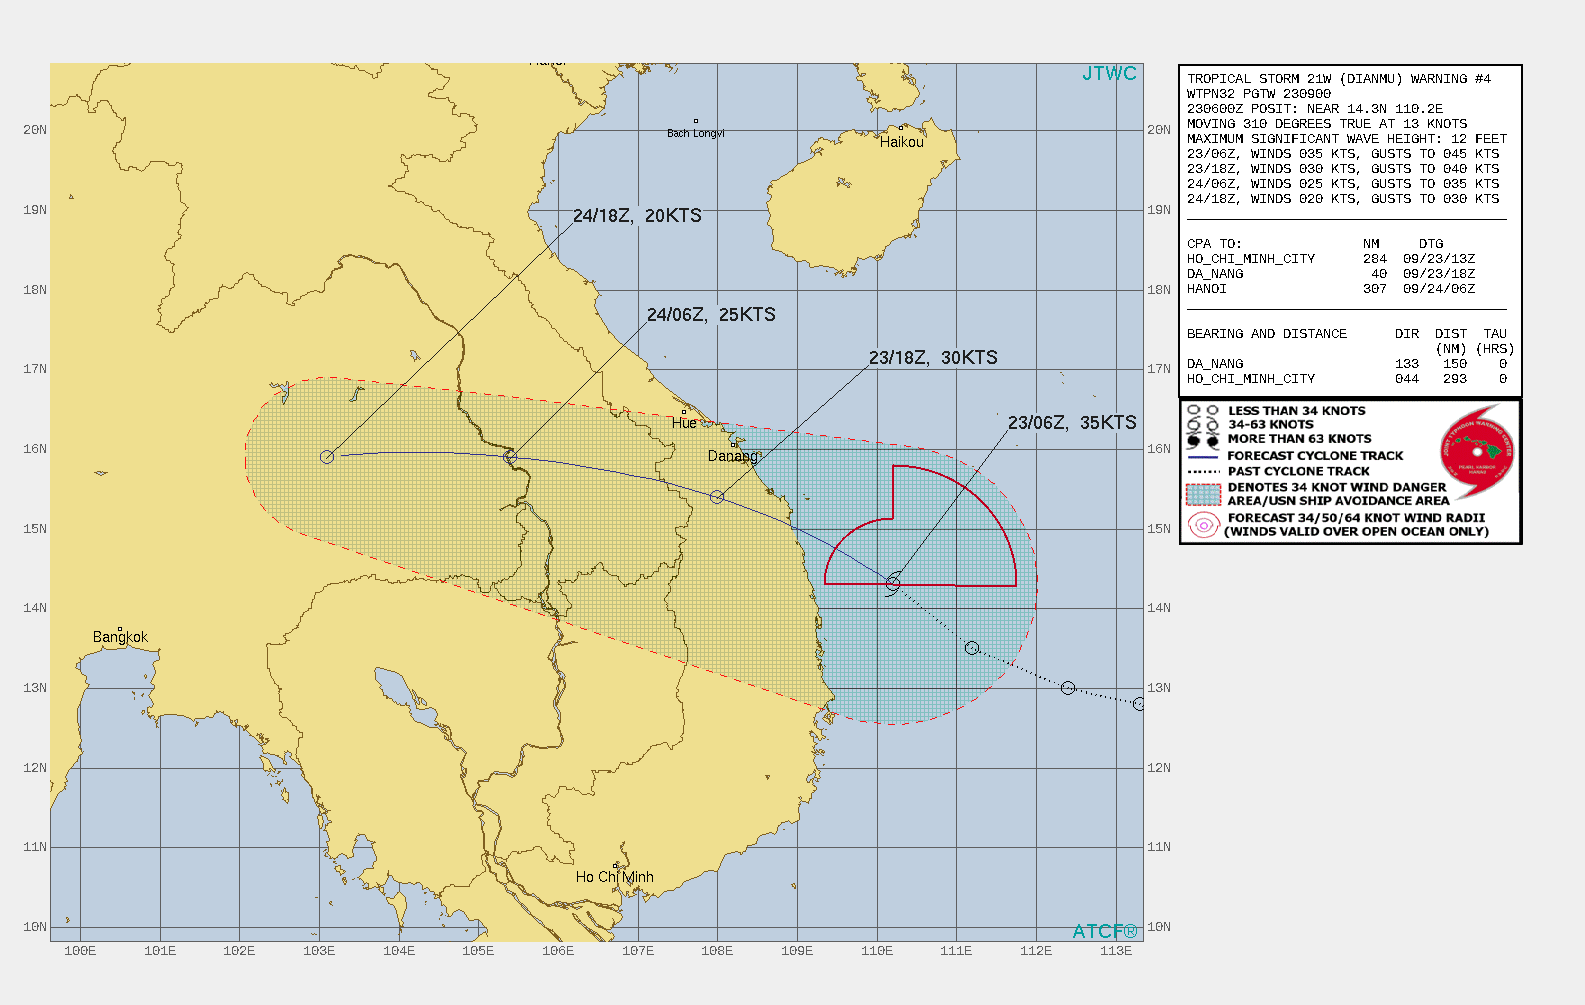 SIGNIFICANT FORECAST CHANGES: THERE ARE NO SIGNIFICANT CHANGES TO THE FORECAST FROM THE PREVIOUS WARNING.  FORECAST DISCUSSION: TD 21W IS EXPECTED TO CONTINUE ON ITS CURRENT TRACK AND MAKE LANDFALL SOUTH OF DANANG BEFORE 12H AND TRANSITION ACROSS THE RUGGED TERRAIN OF VIETNAM AND INTO CAMBODIA. THE MARGINAL ENVIRONMENT WILL LIKELY MAINTAIN INTENSITY WHILE OVER WATER BEFORE BEGINNING DISSIPATION DUE TO LAND INTERACTION. LAND INTERACTION WILL ERODE THE SYSTEM TO DISSIPATION BY 36H.